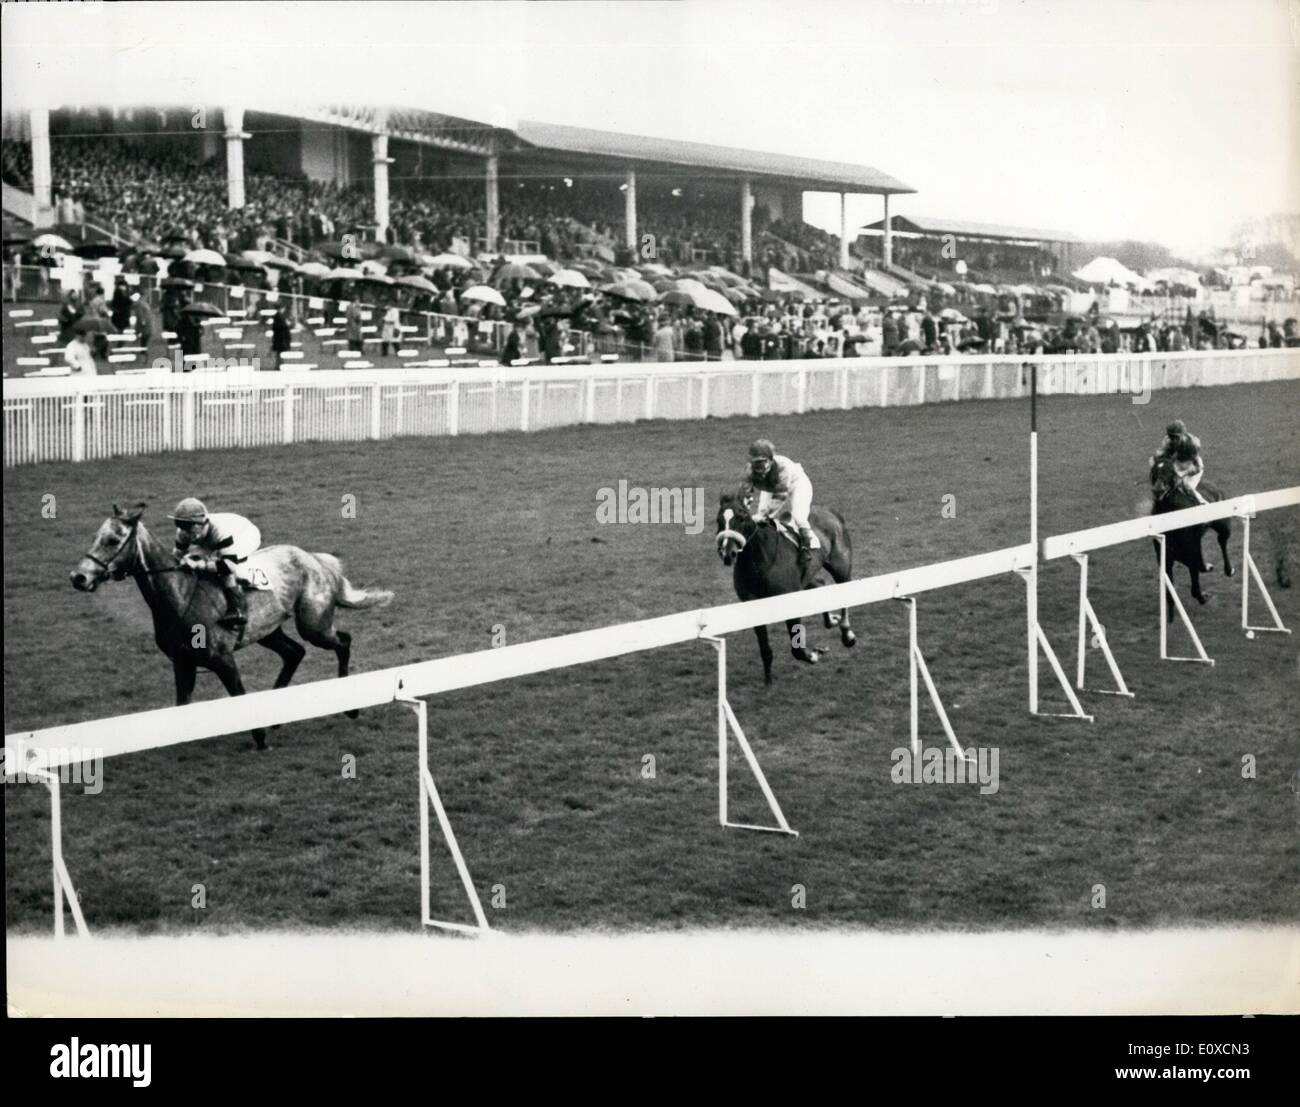 Apr. 04, 1966 - Racing at Epsom The Great Metropolitan: Photo shows The finish of the Great Metropolitan Handicap, at Epsom today - won by Cullen (F. Nesse); with Gypsy Refrain (M.L. Thomas), 2nd, and Colonel Imp (C. Gissing), 3rd. Stock Photo